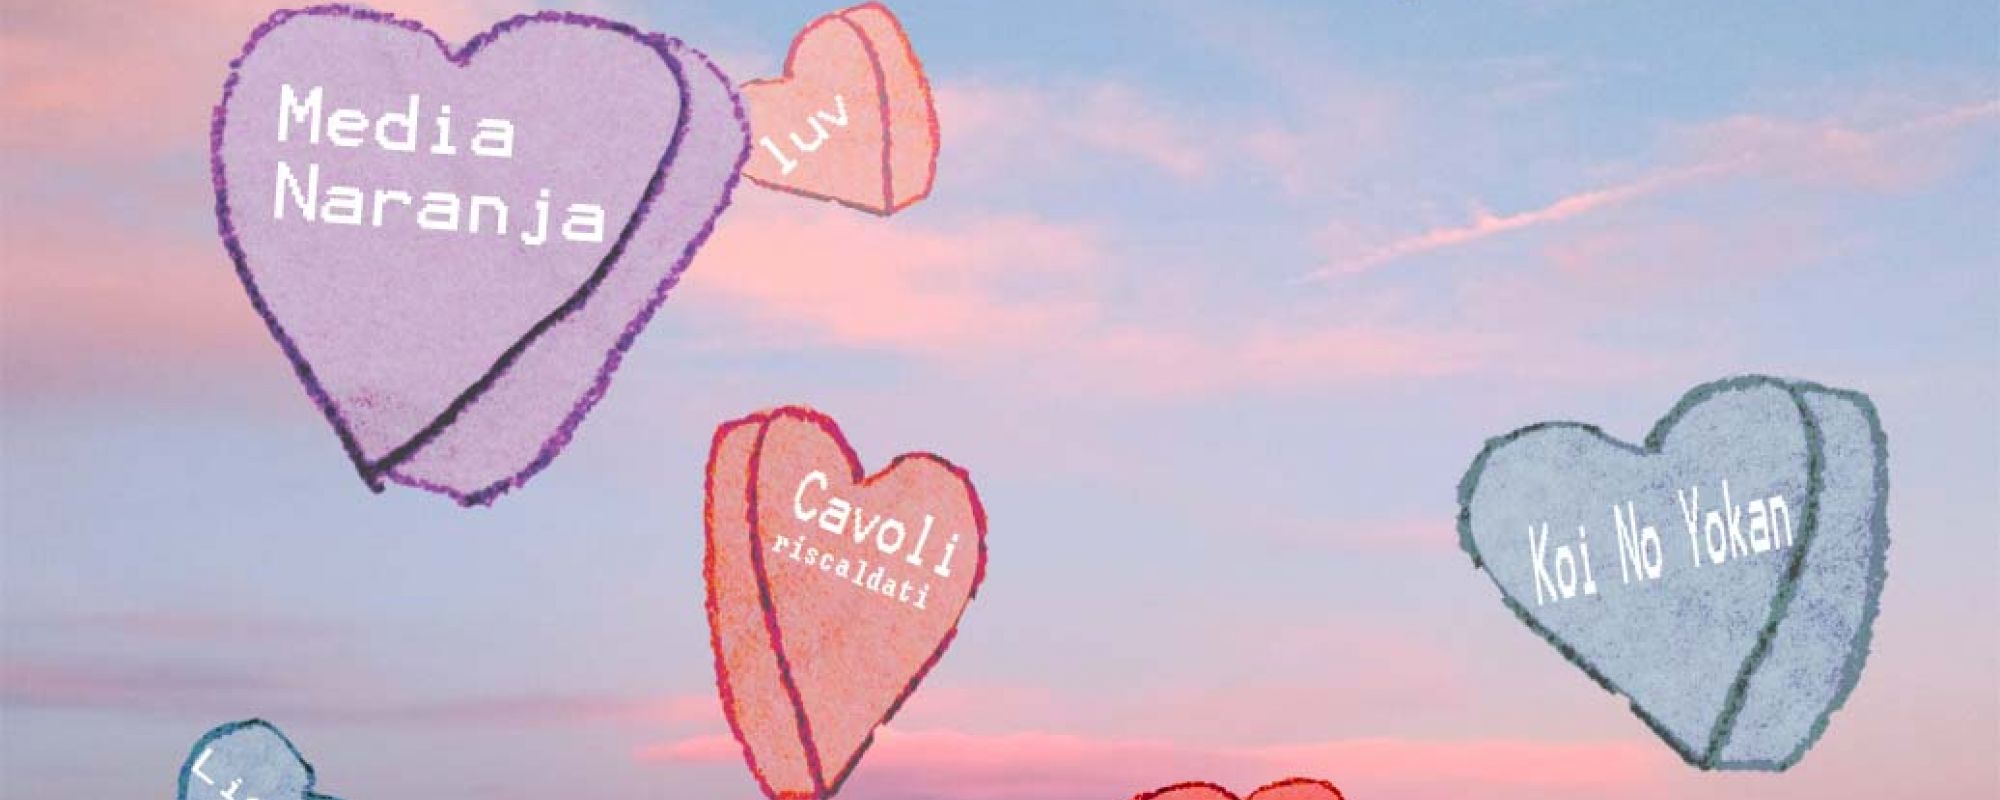 Candy message hearts in a pink sky